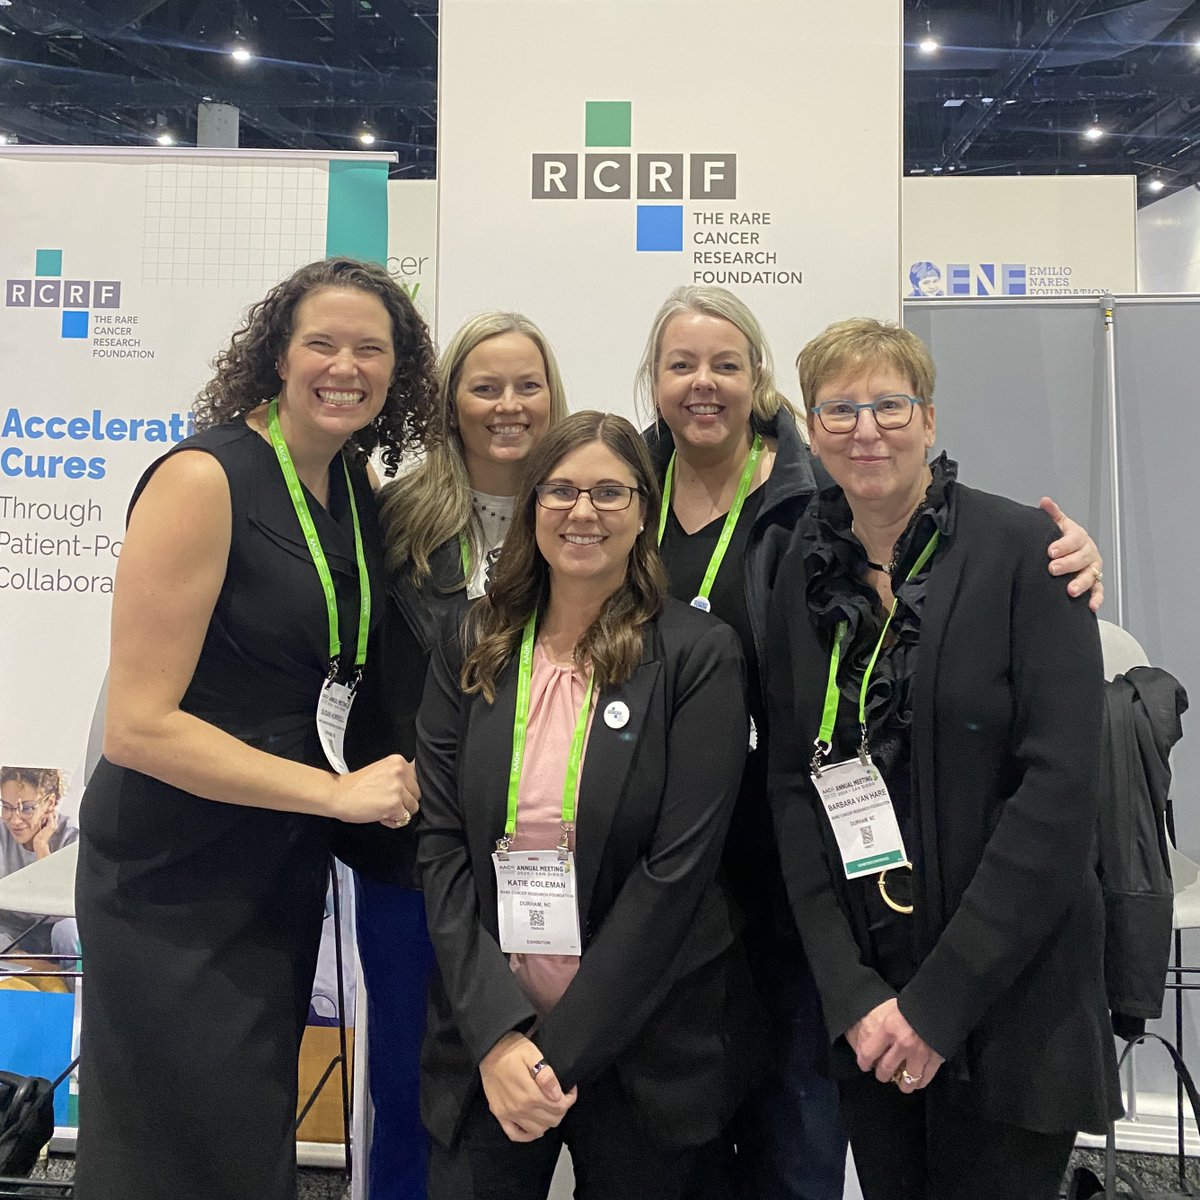 The RCRF team represented at the American Association for Cancer Research conference. We connected with brilliant researchers, spoke with people about the incredible rare cancer patient community, and were inspired by the talks and connections! #AACR24 #rarecancercommunity